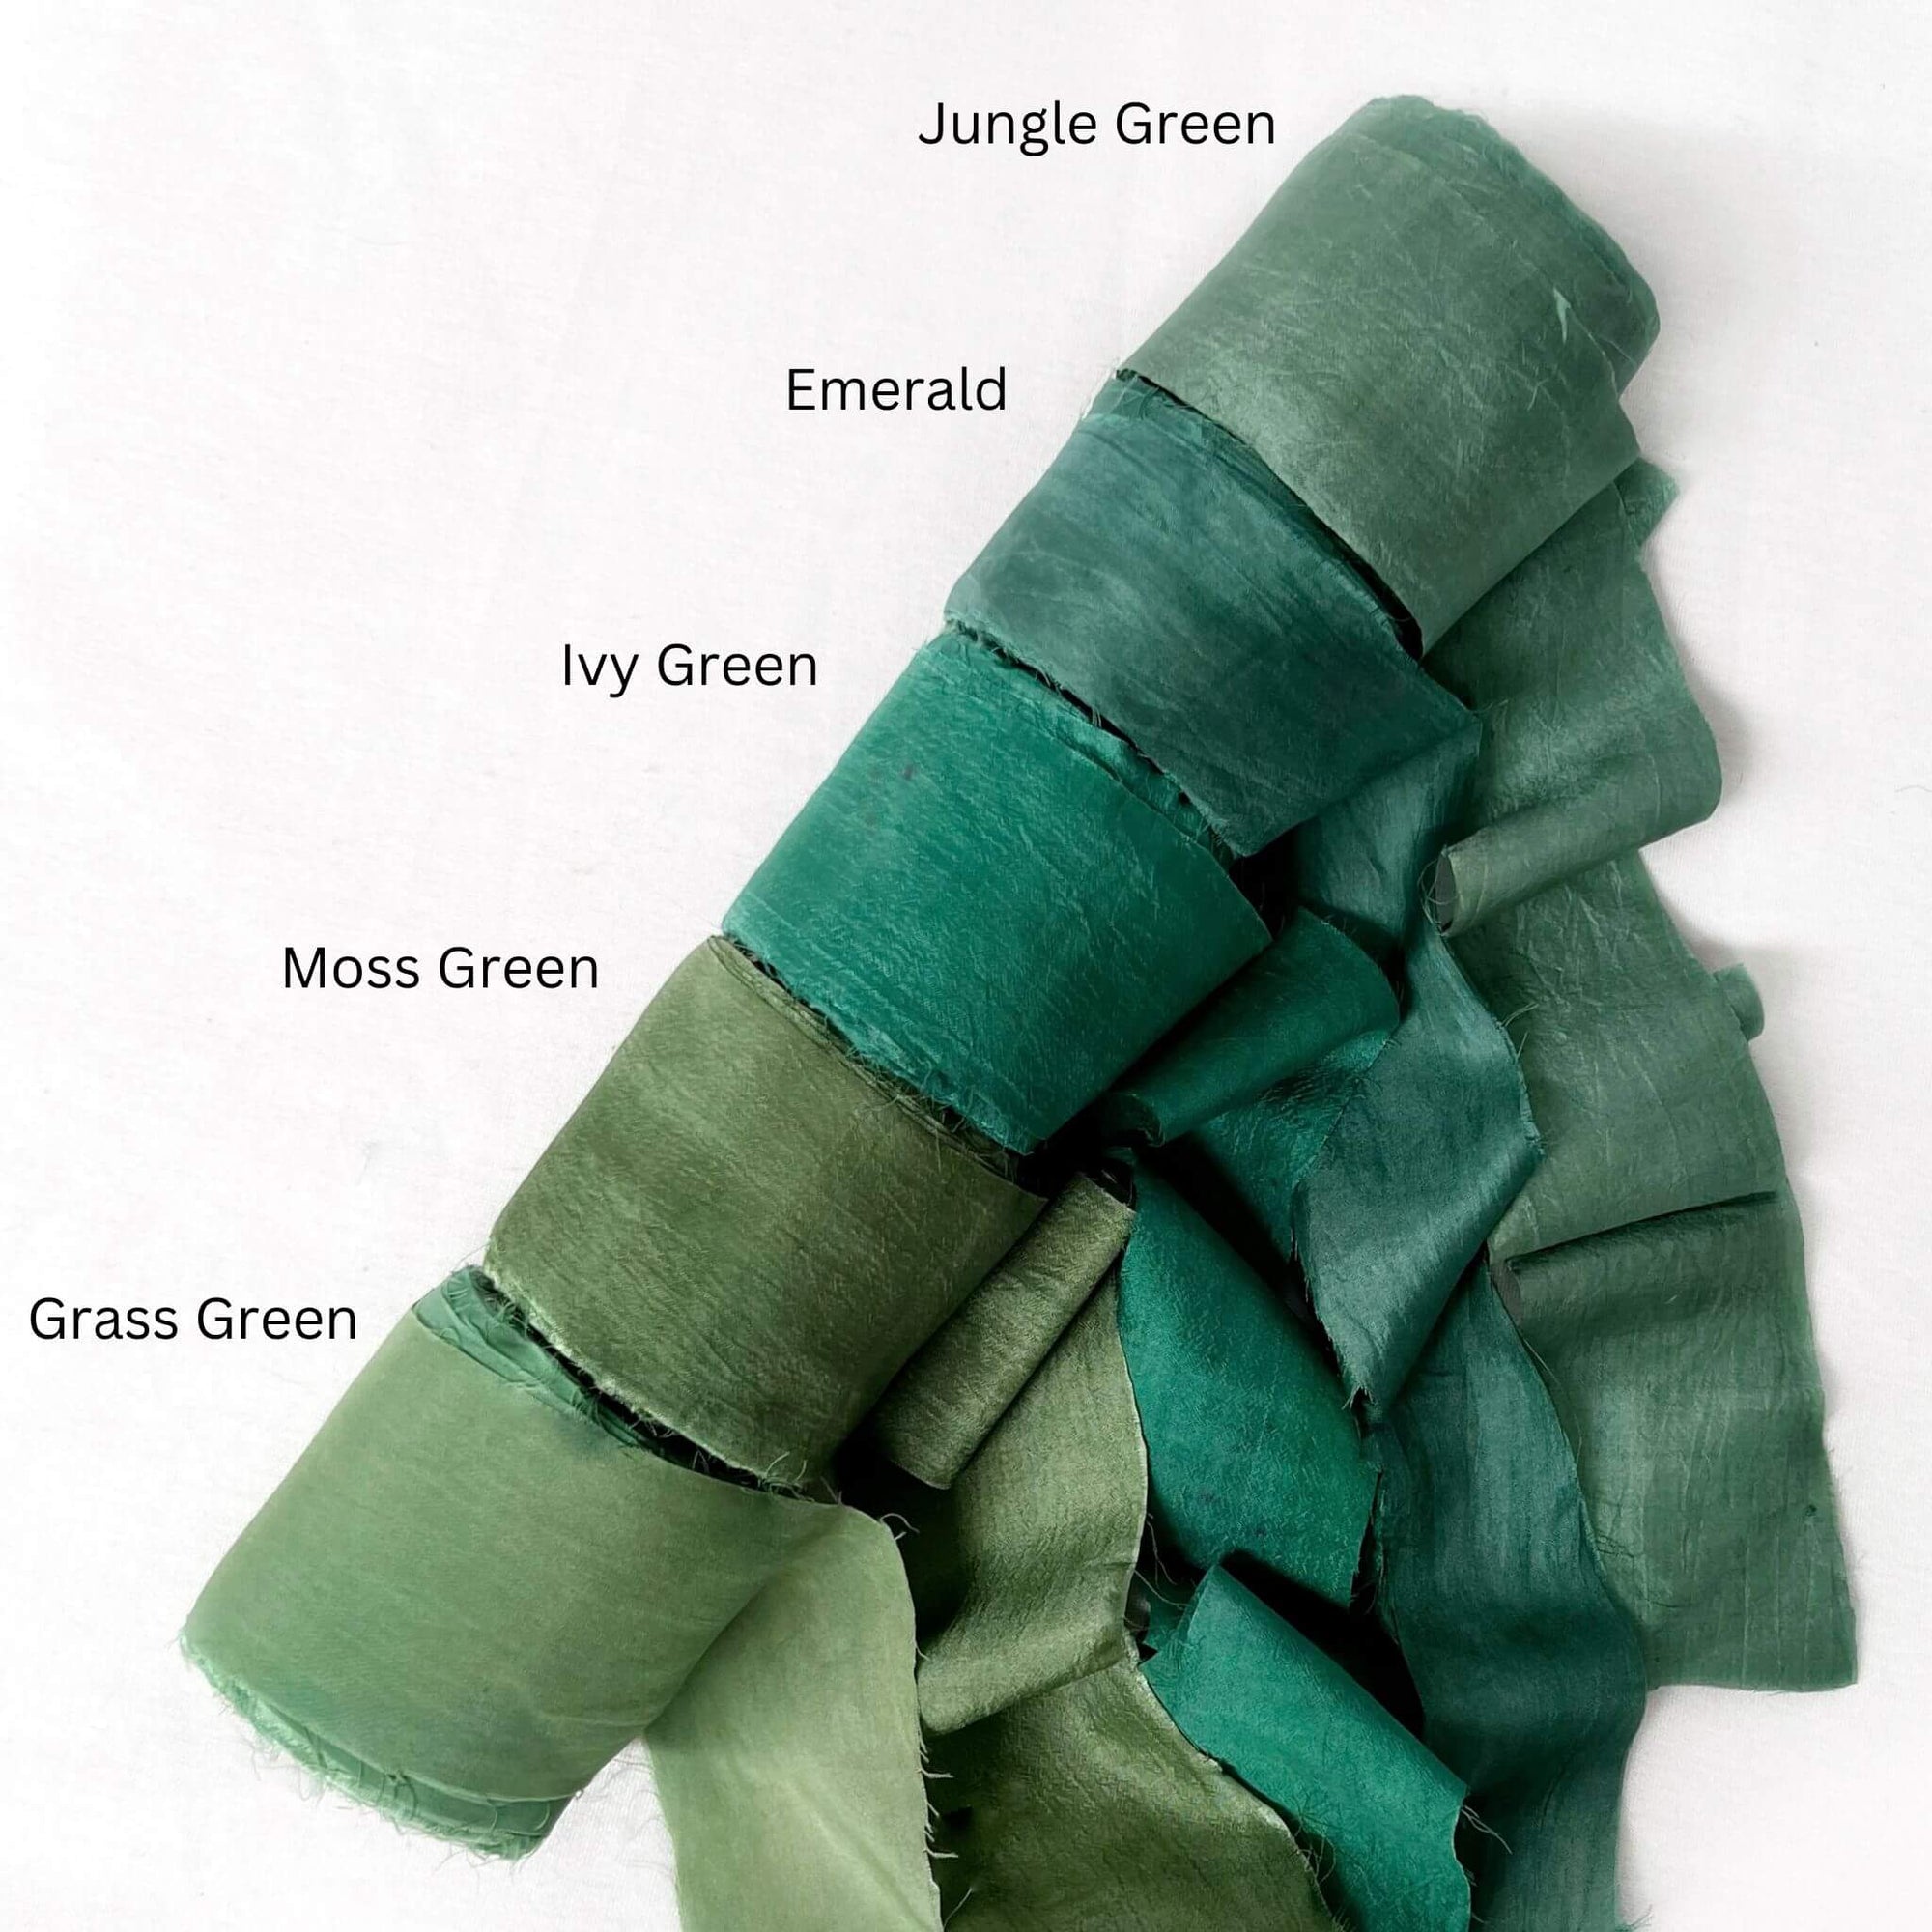 deep green tones jungle emerald ivy green moss grass silk roll group photo showing up close texture on white backdrop